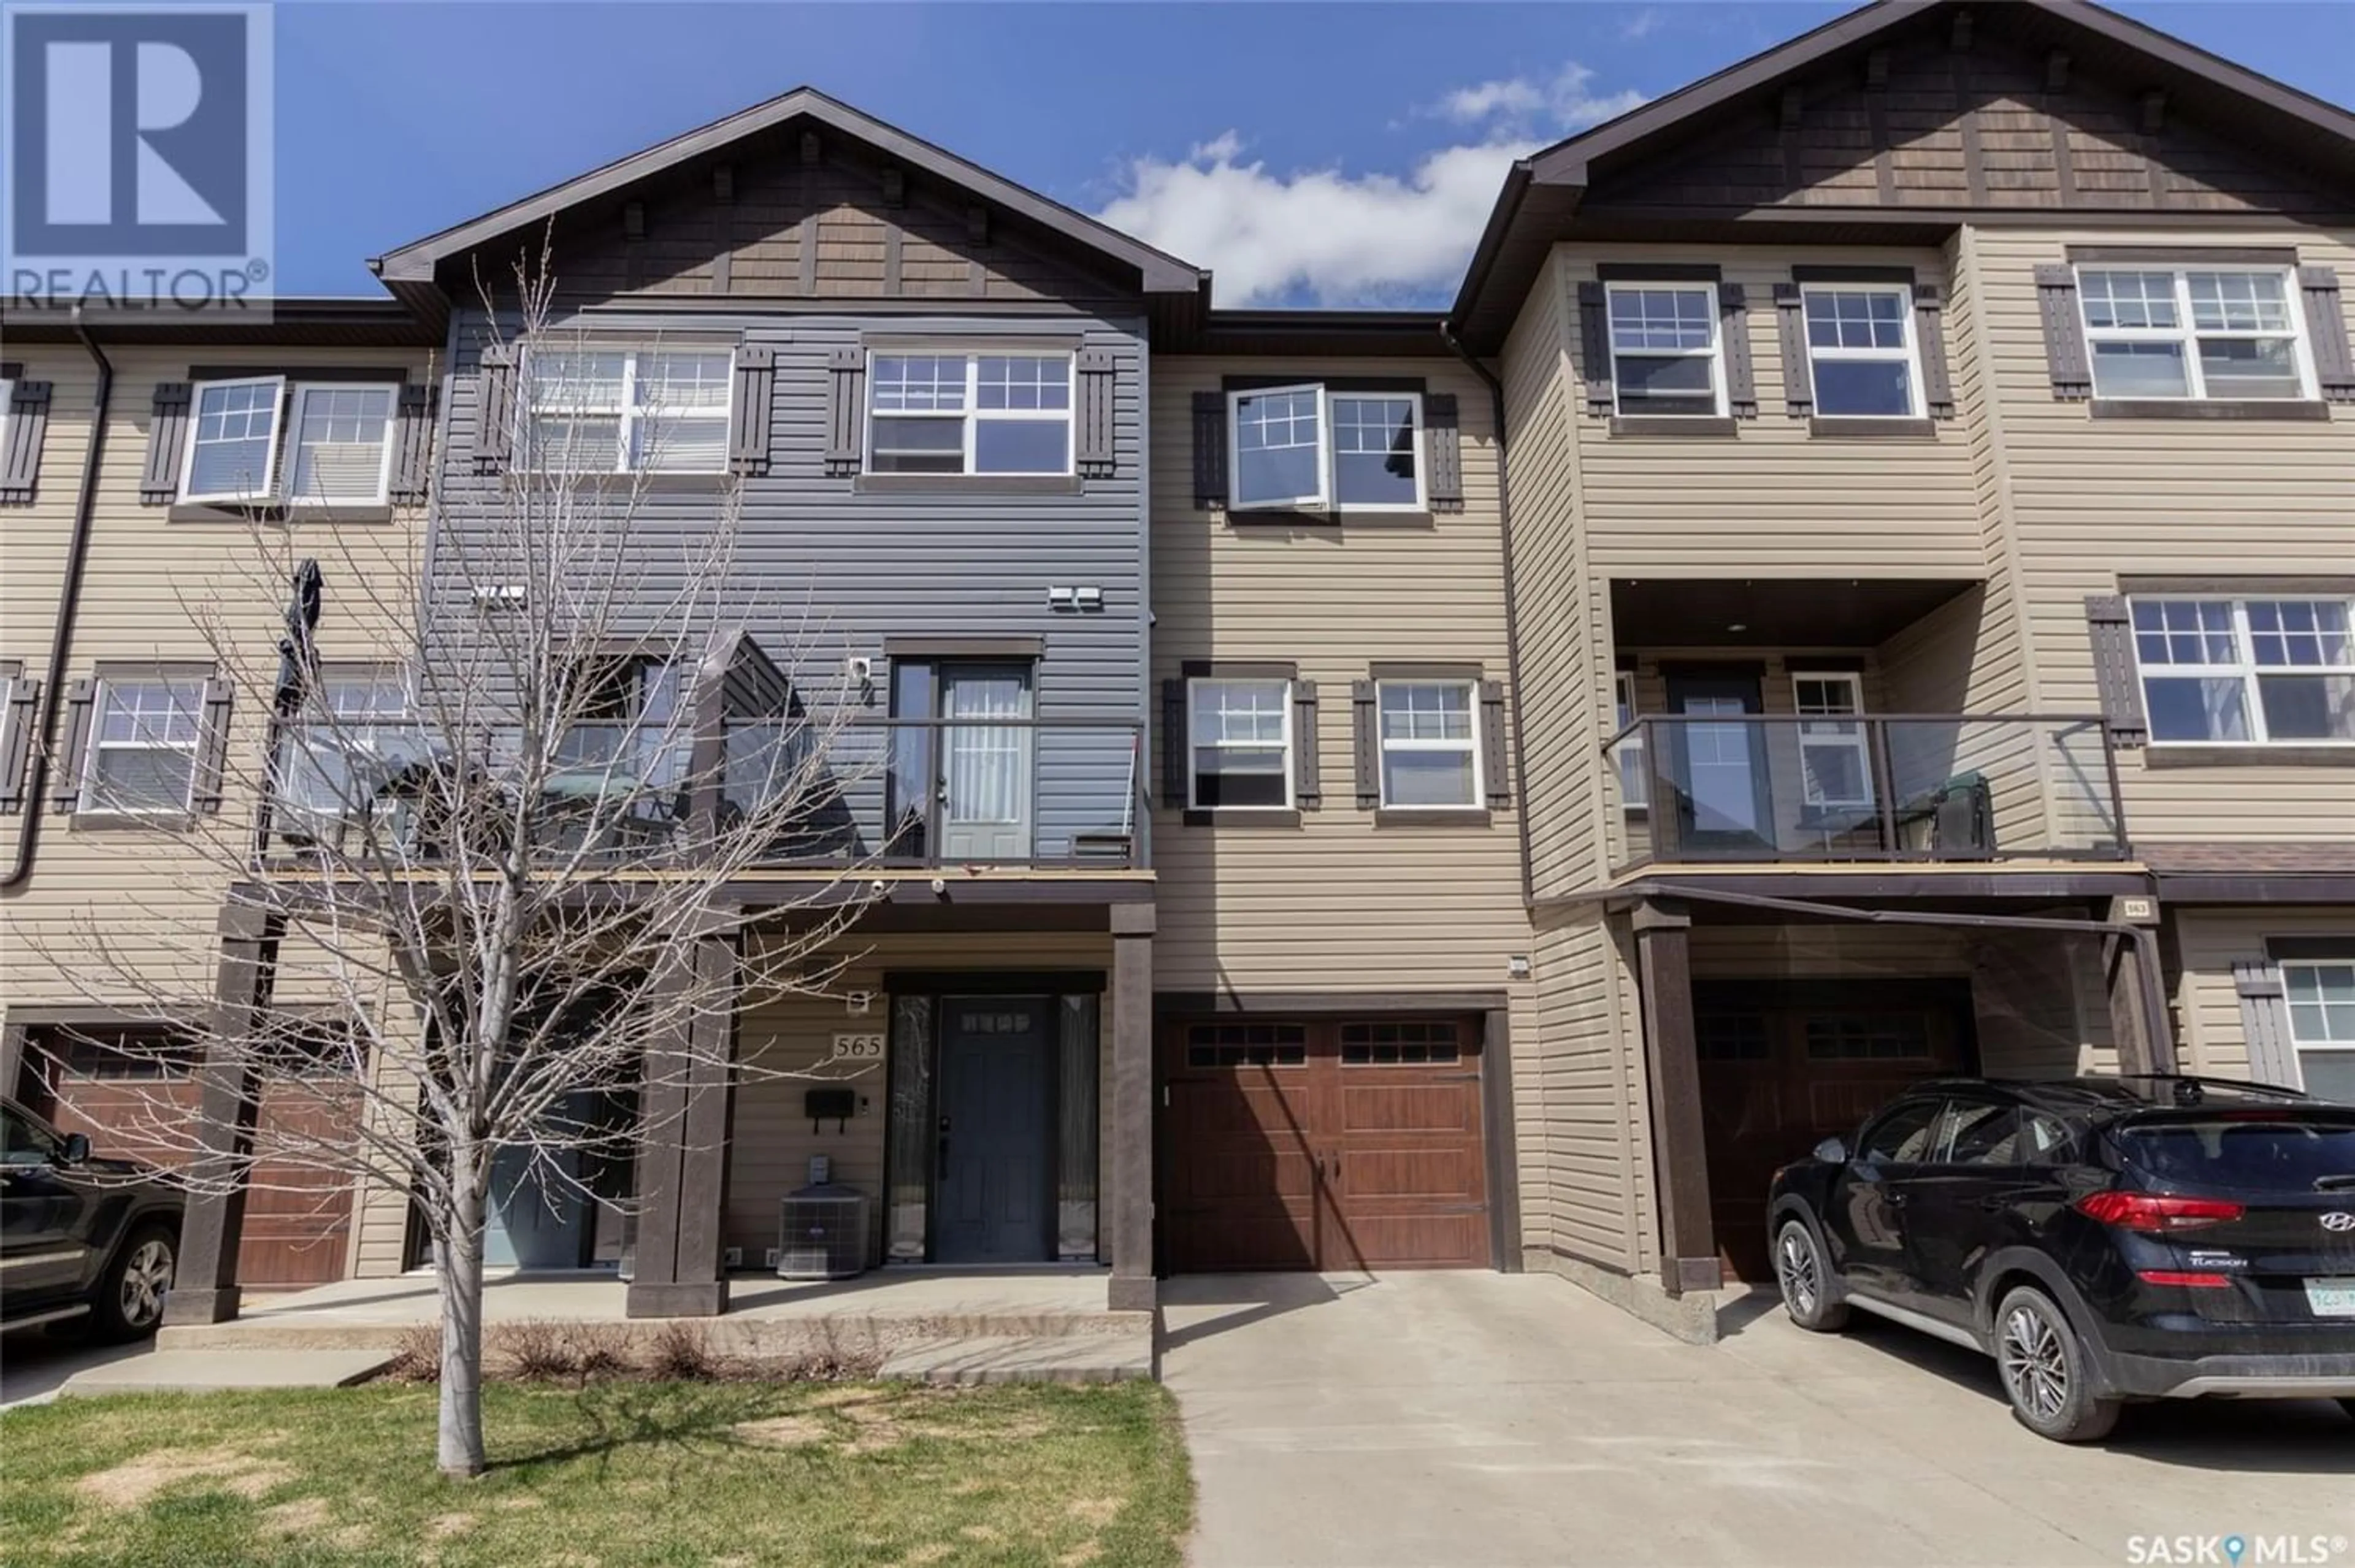 A pic from exterior of the house or condo for 565 150 Langlois WAY, Saskatoon Saskatchewan S7T0L3